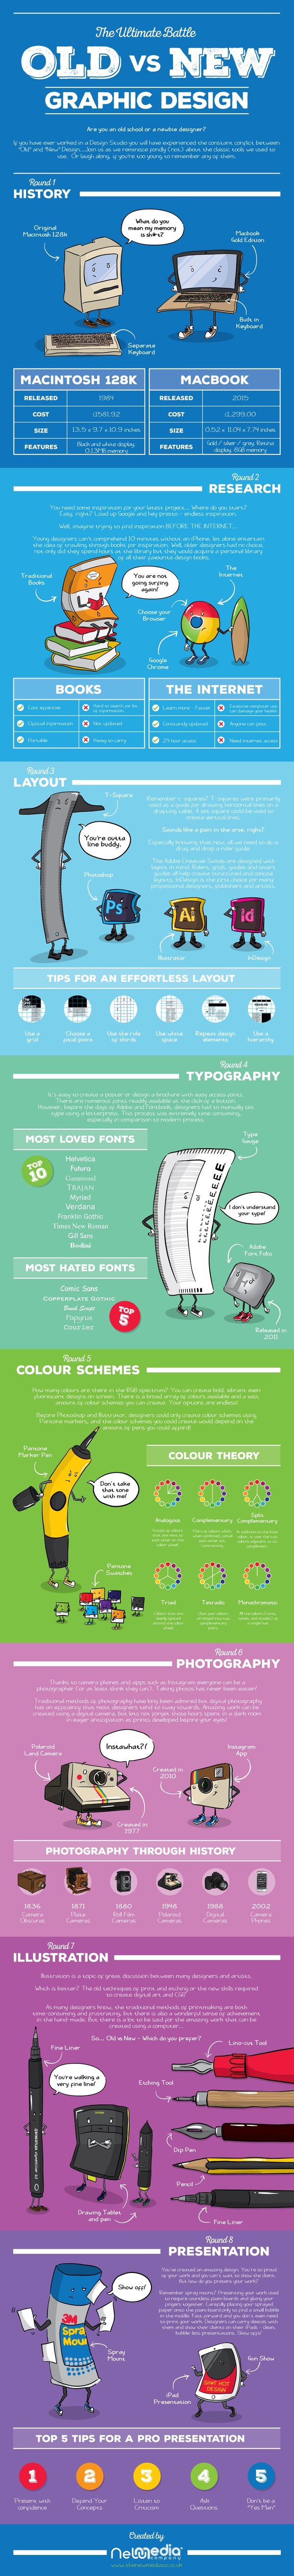 old vs new graphic design infographic